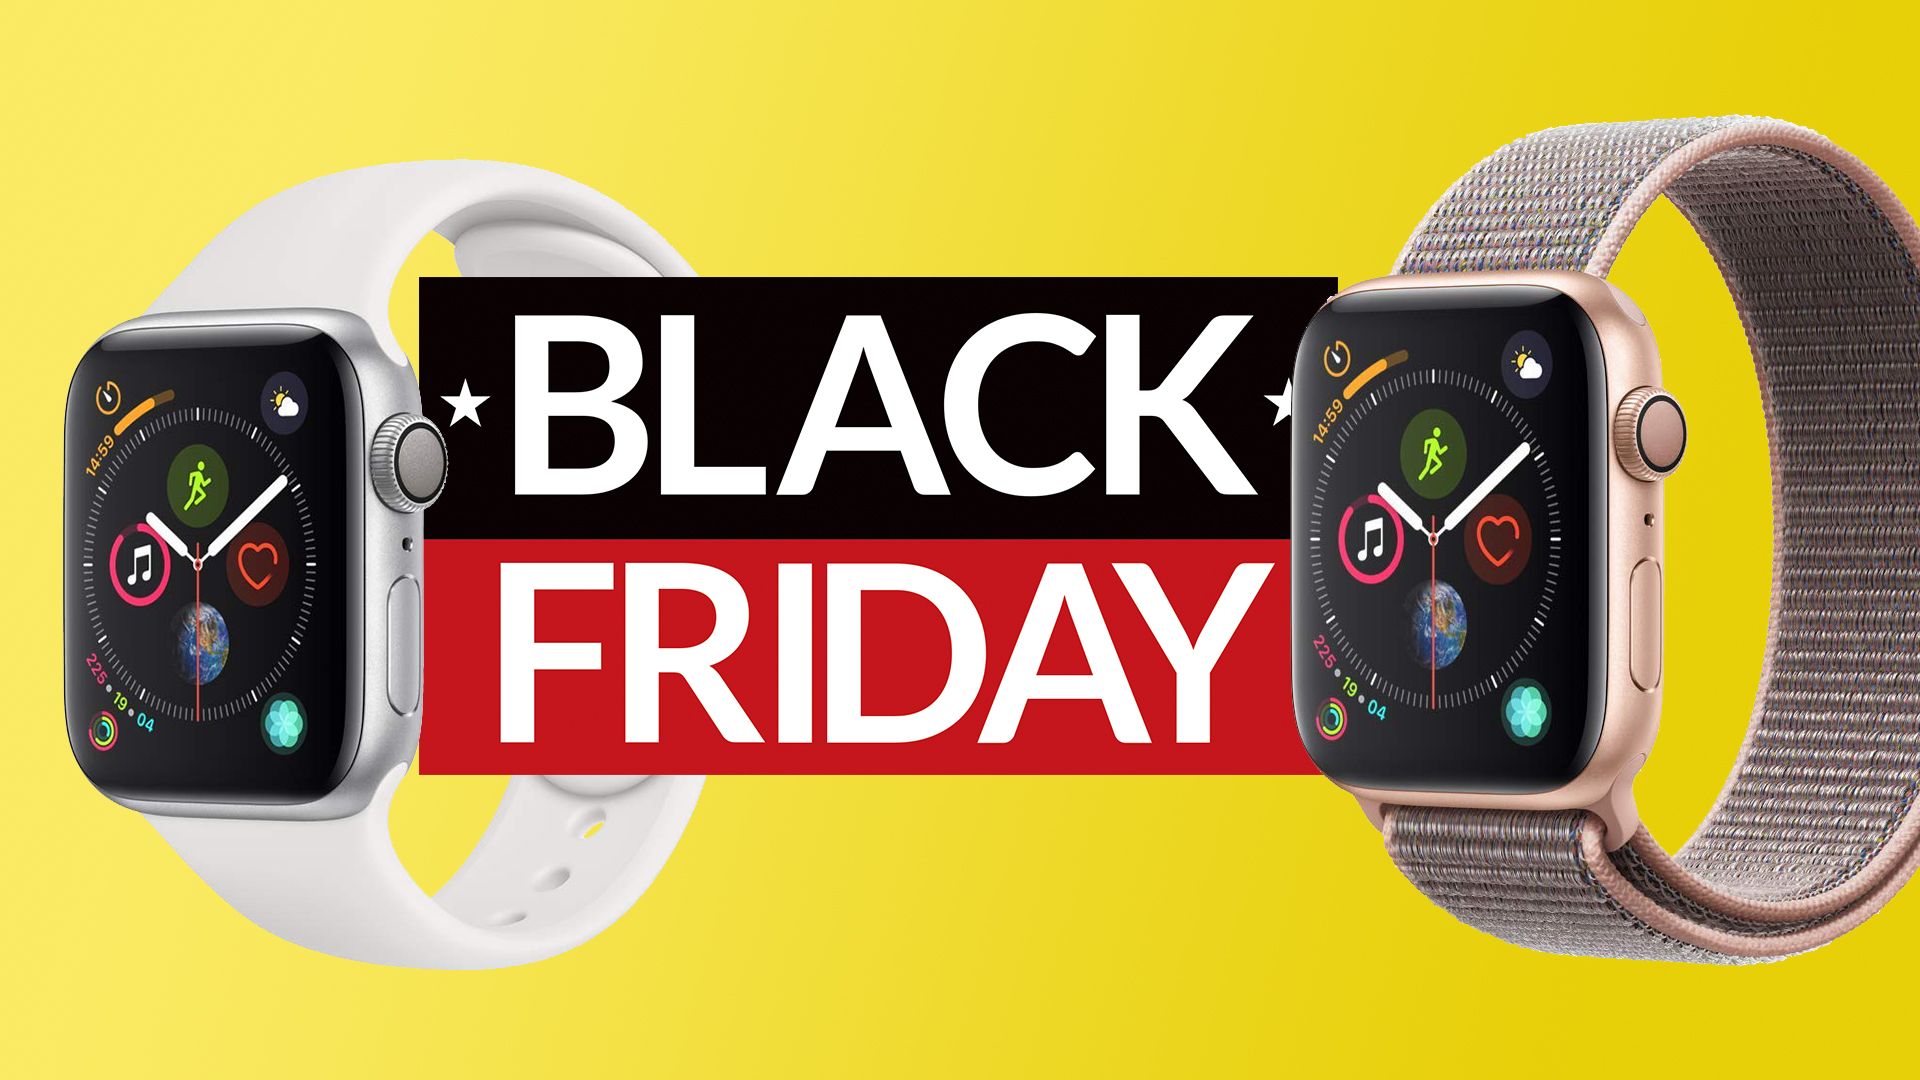 Amazing Apple Watch Series 4 Black Friday deal is just £299 at Amazon T3